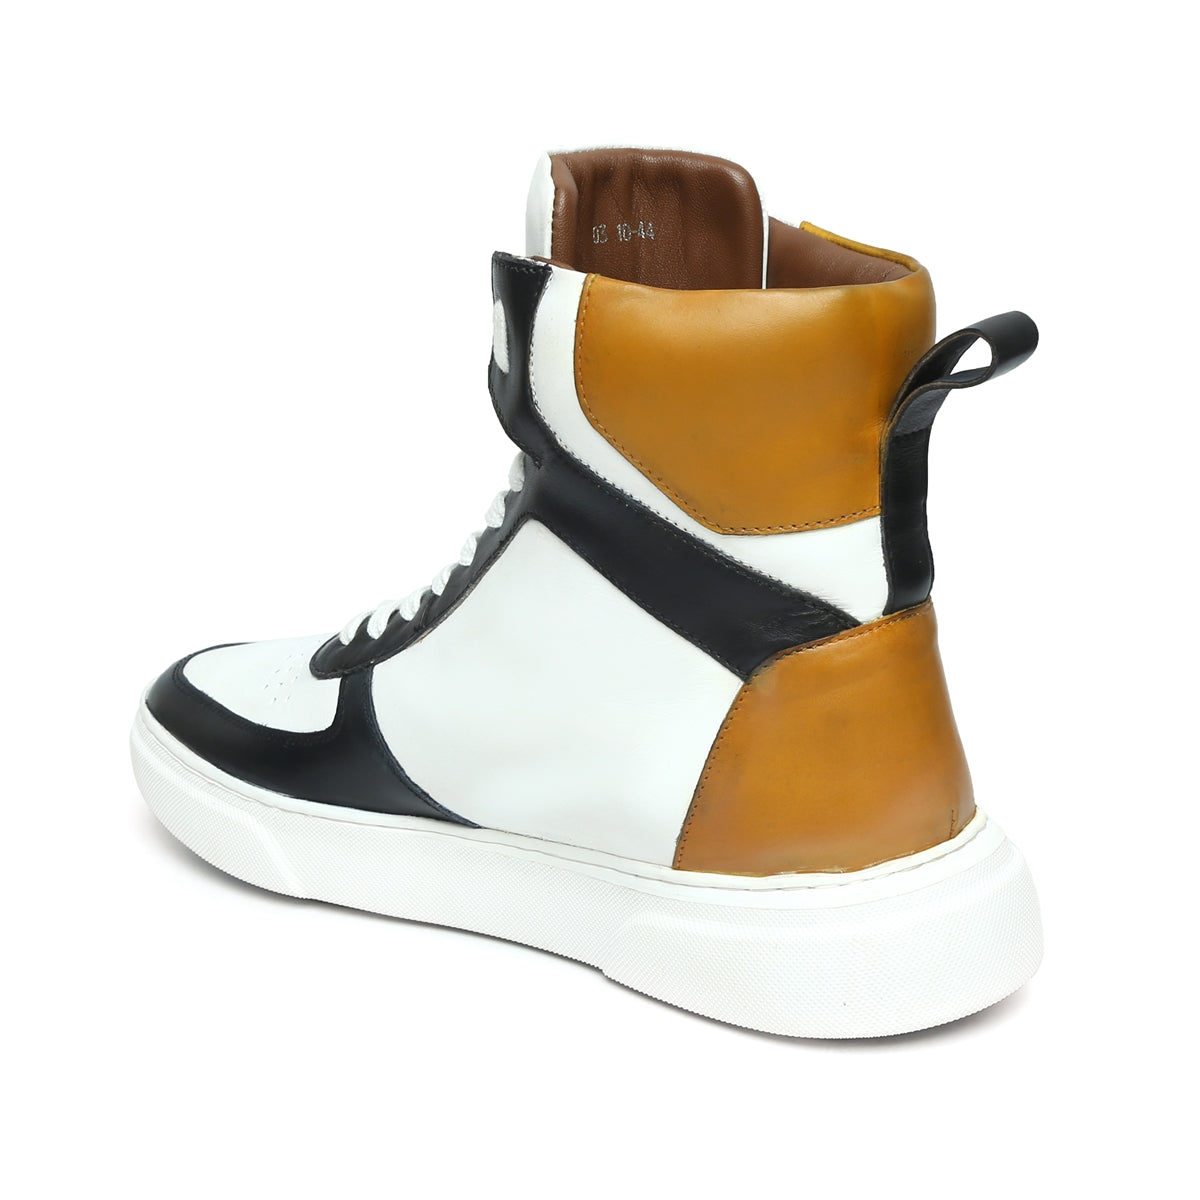 Contrasting Brown & Tan Leather Sneakers White High Ankle by Brune & B